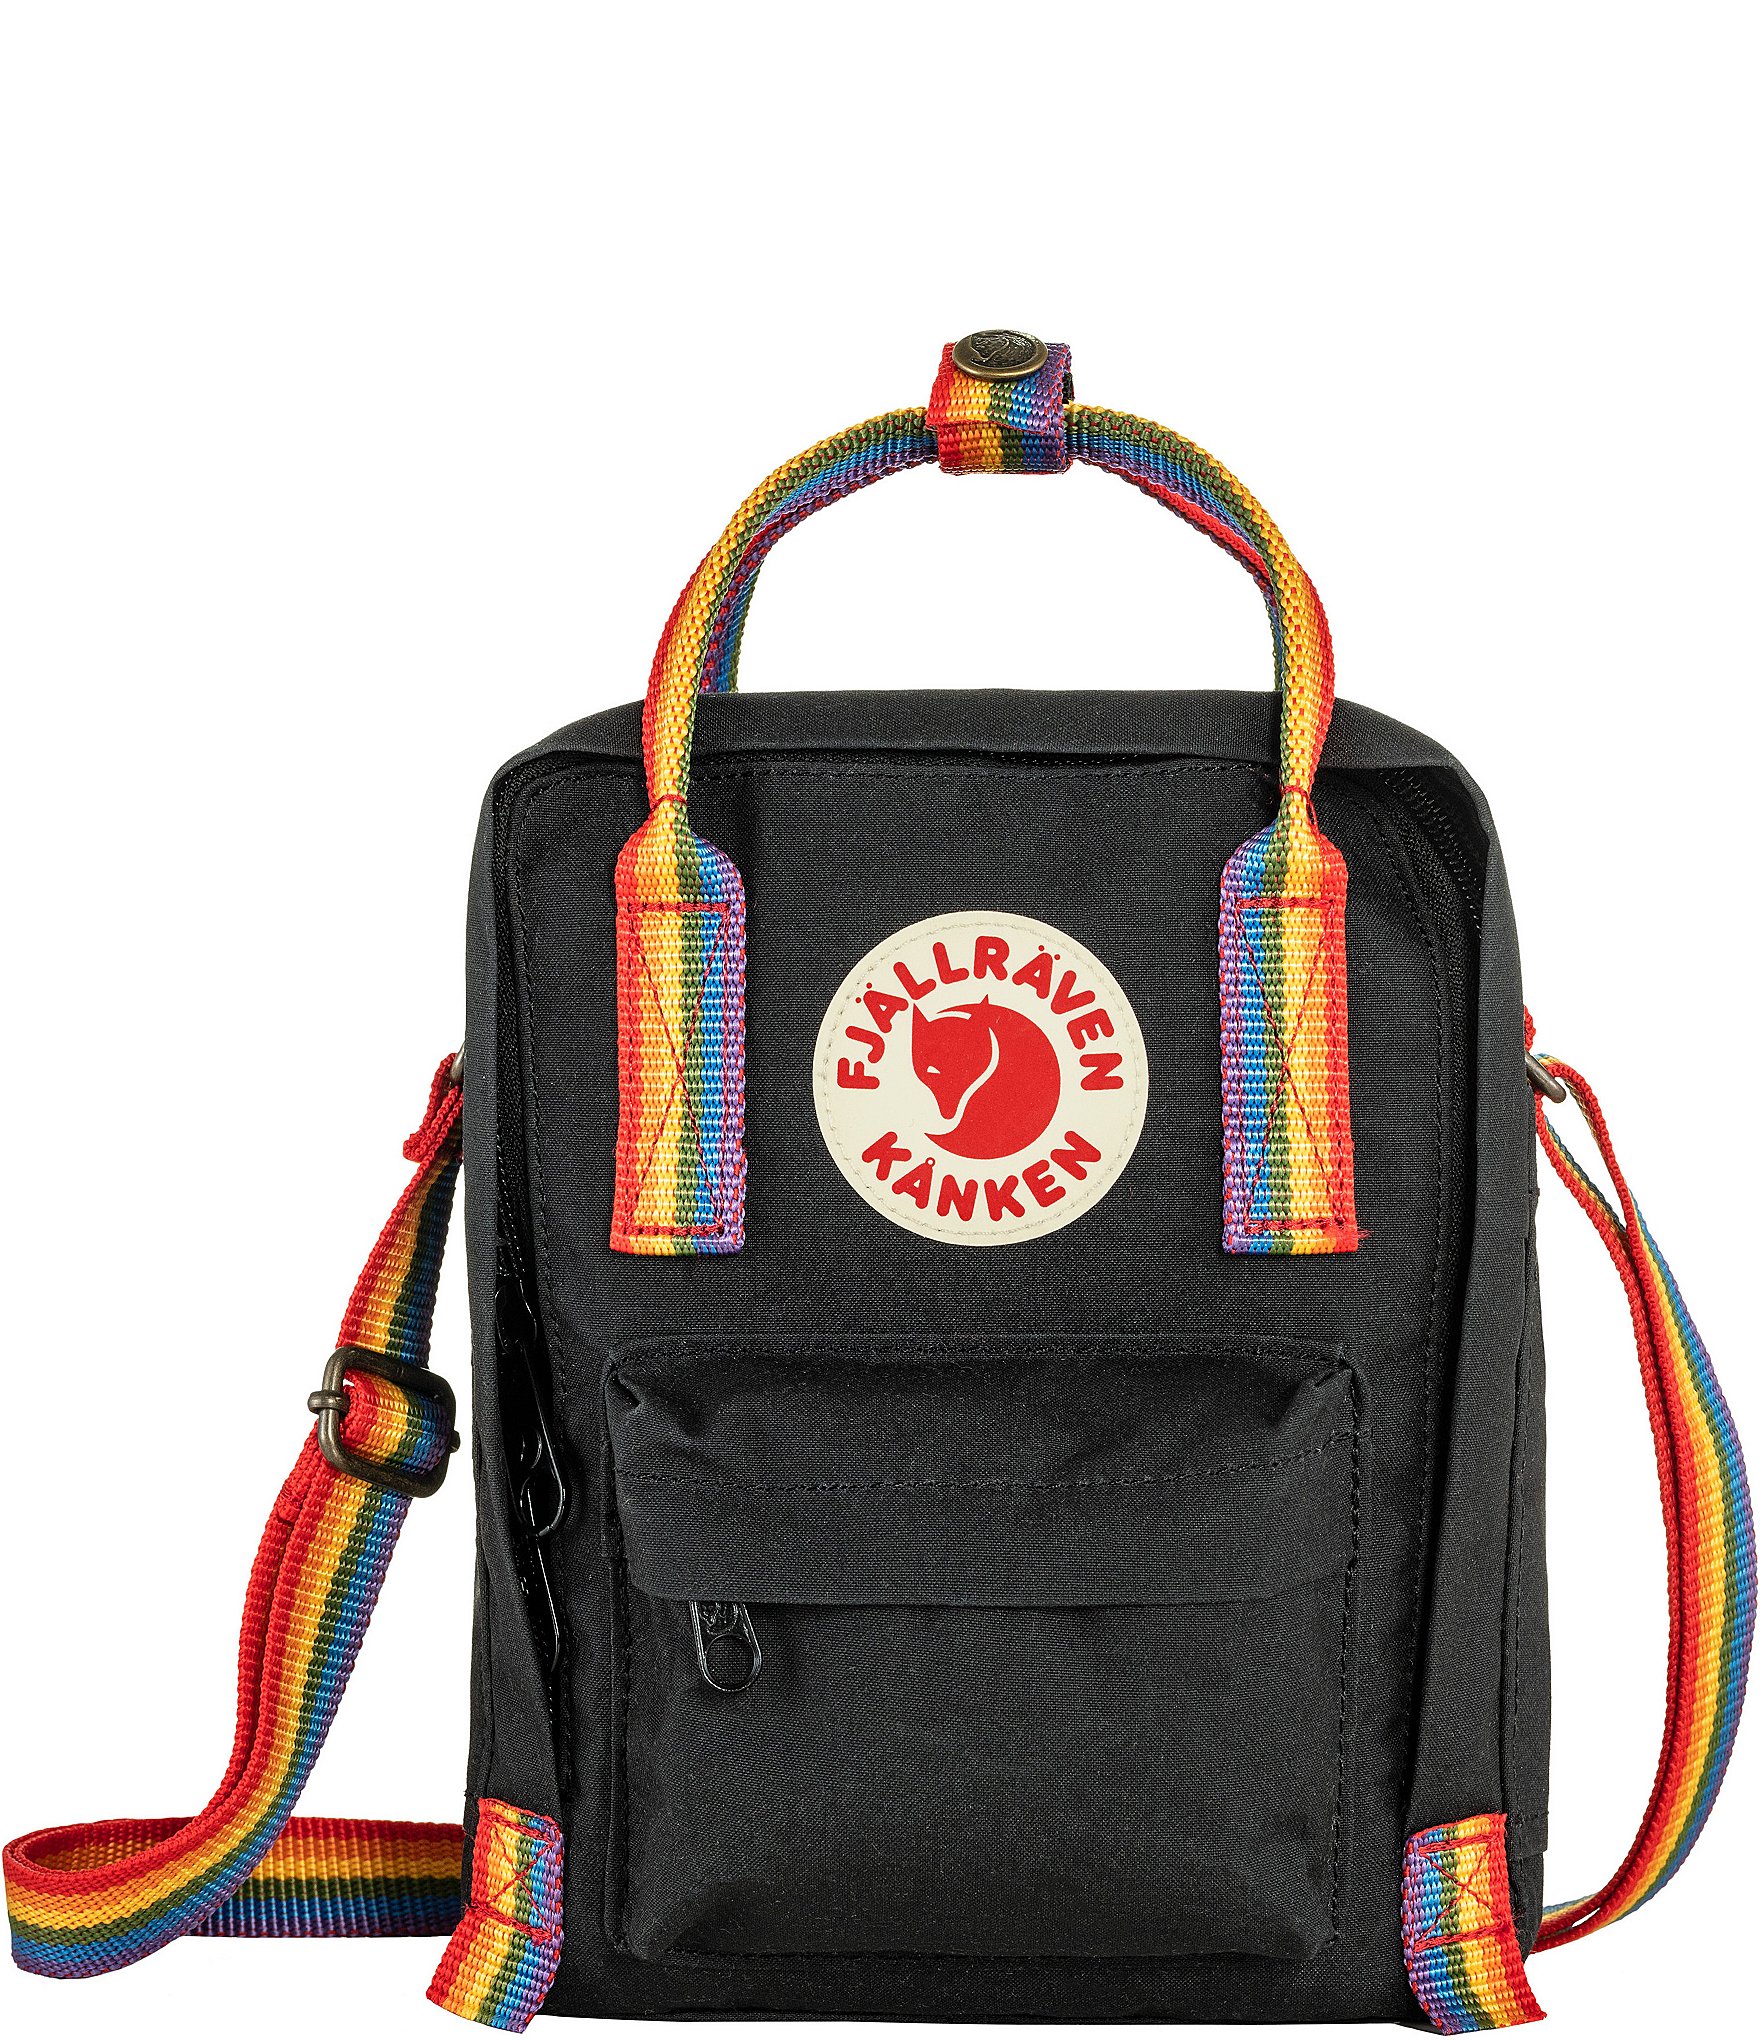 DECORATING MY FJALLRAVEN KANKEN BAG WITH PATCHES 